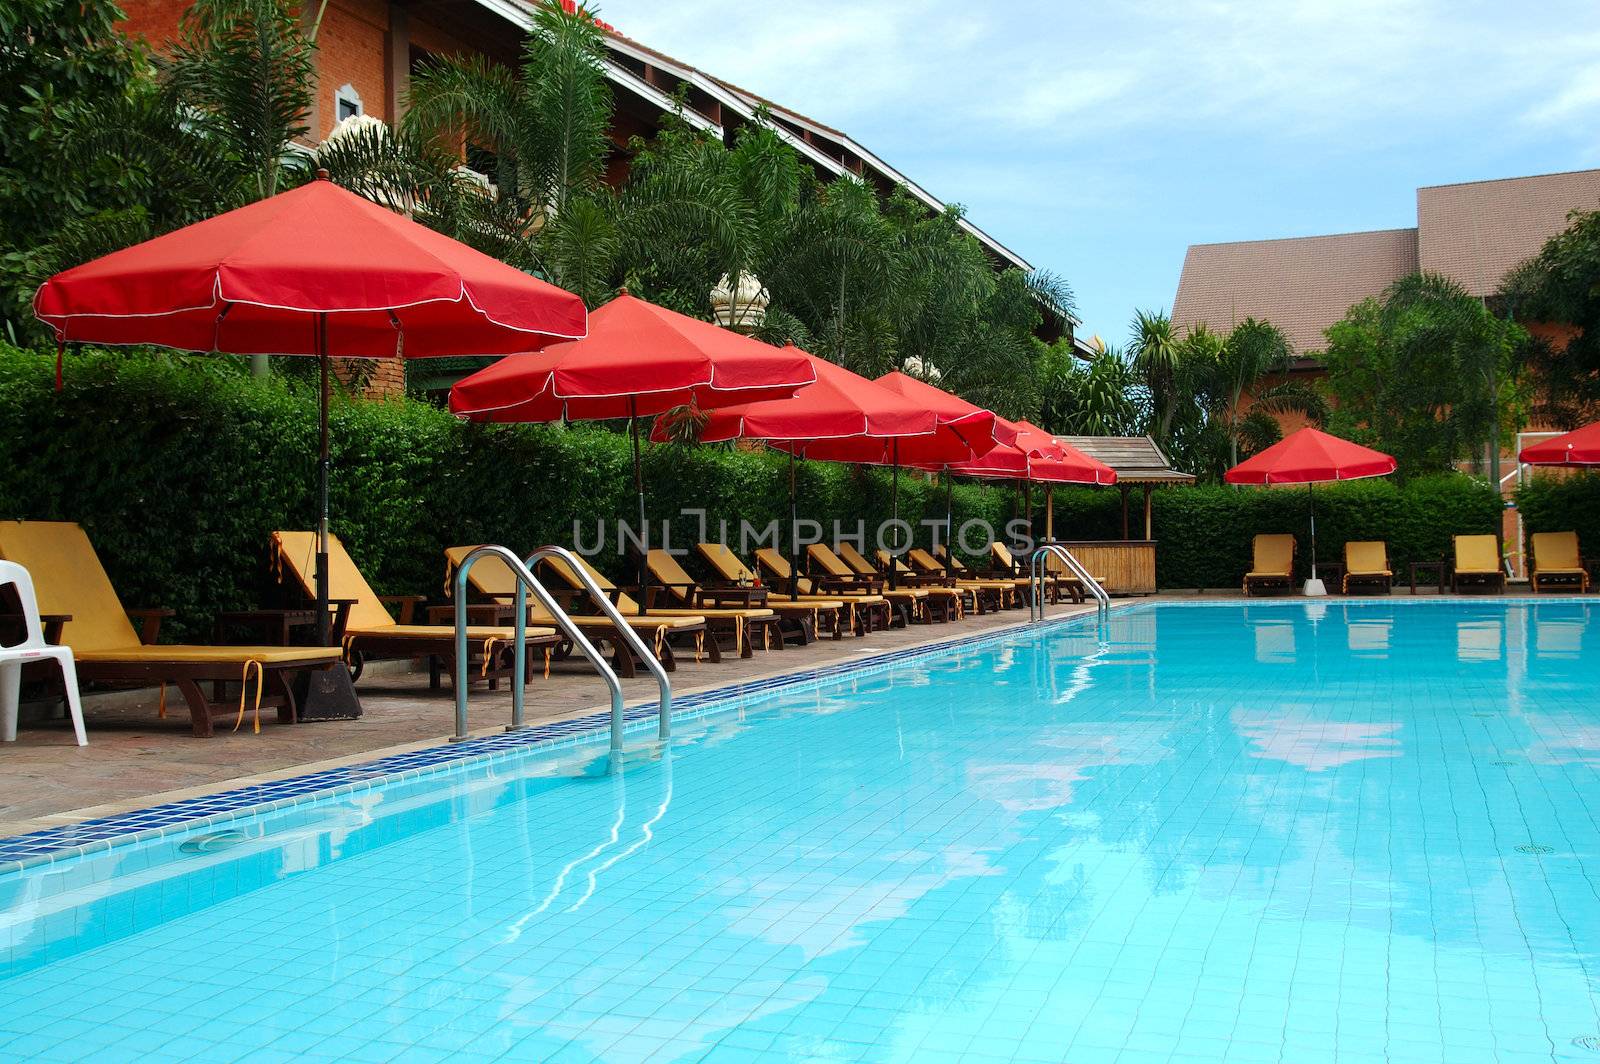 trestle-beds and red umbrellas near the resort's pool